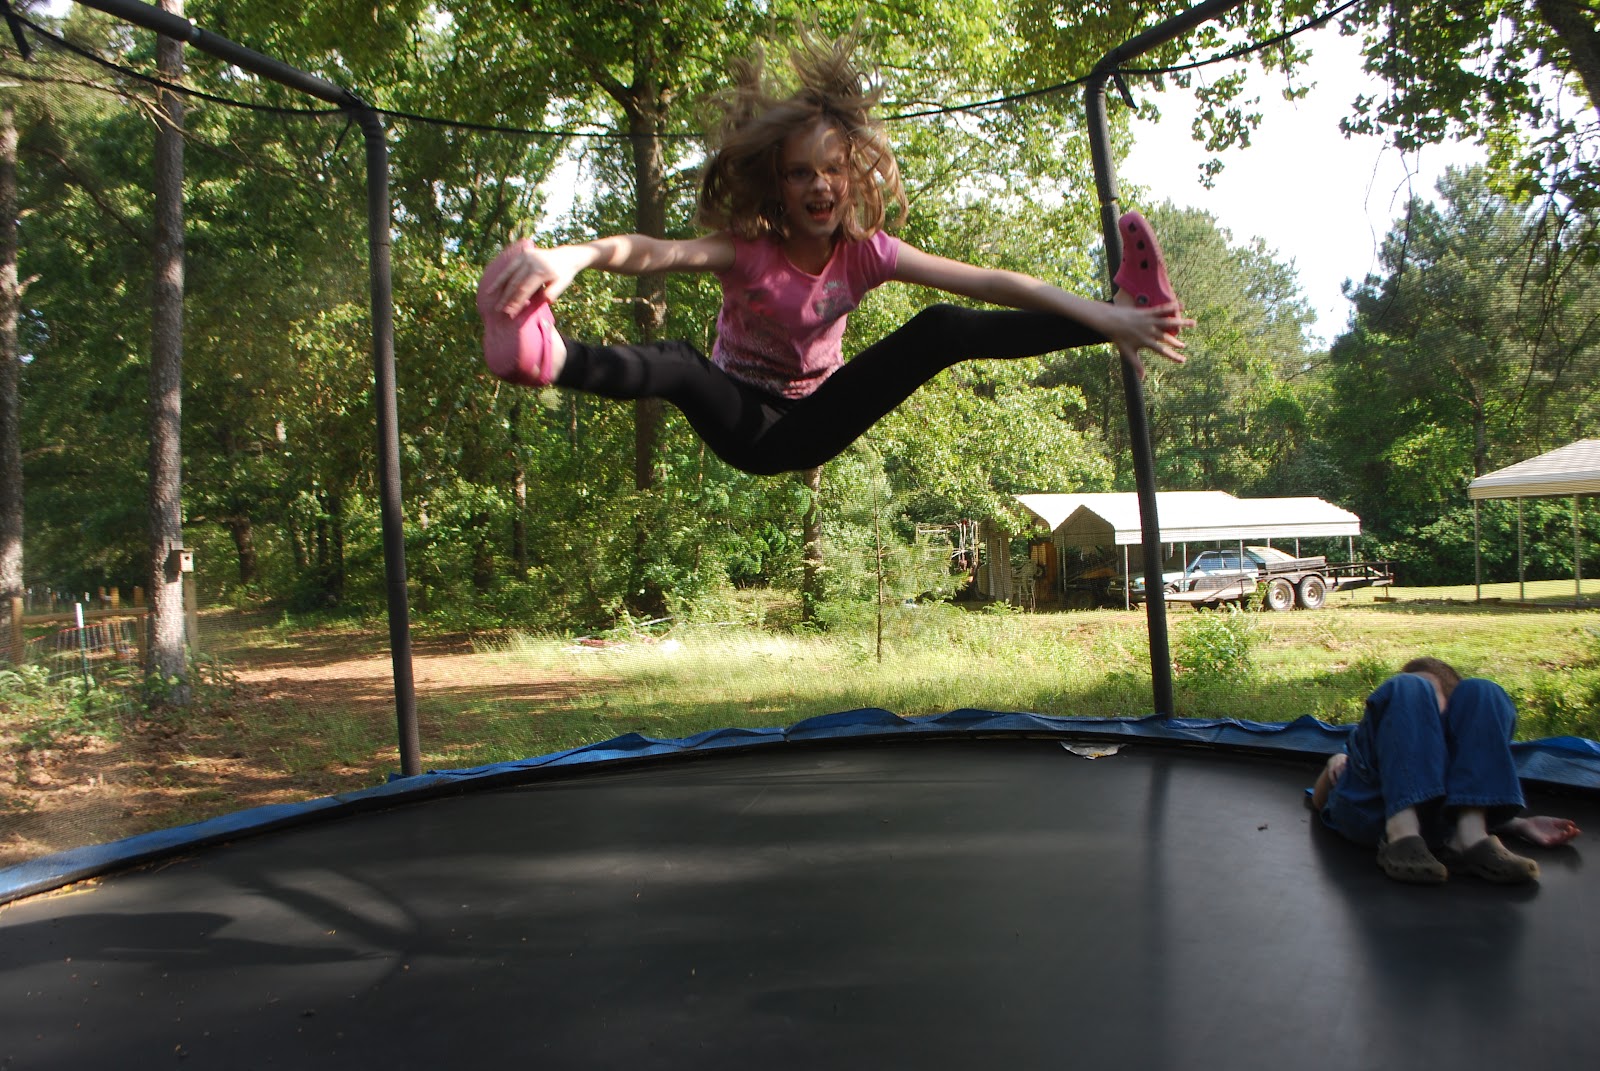 Life with ZMC: Fun on the Trampoline